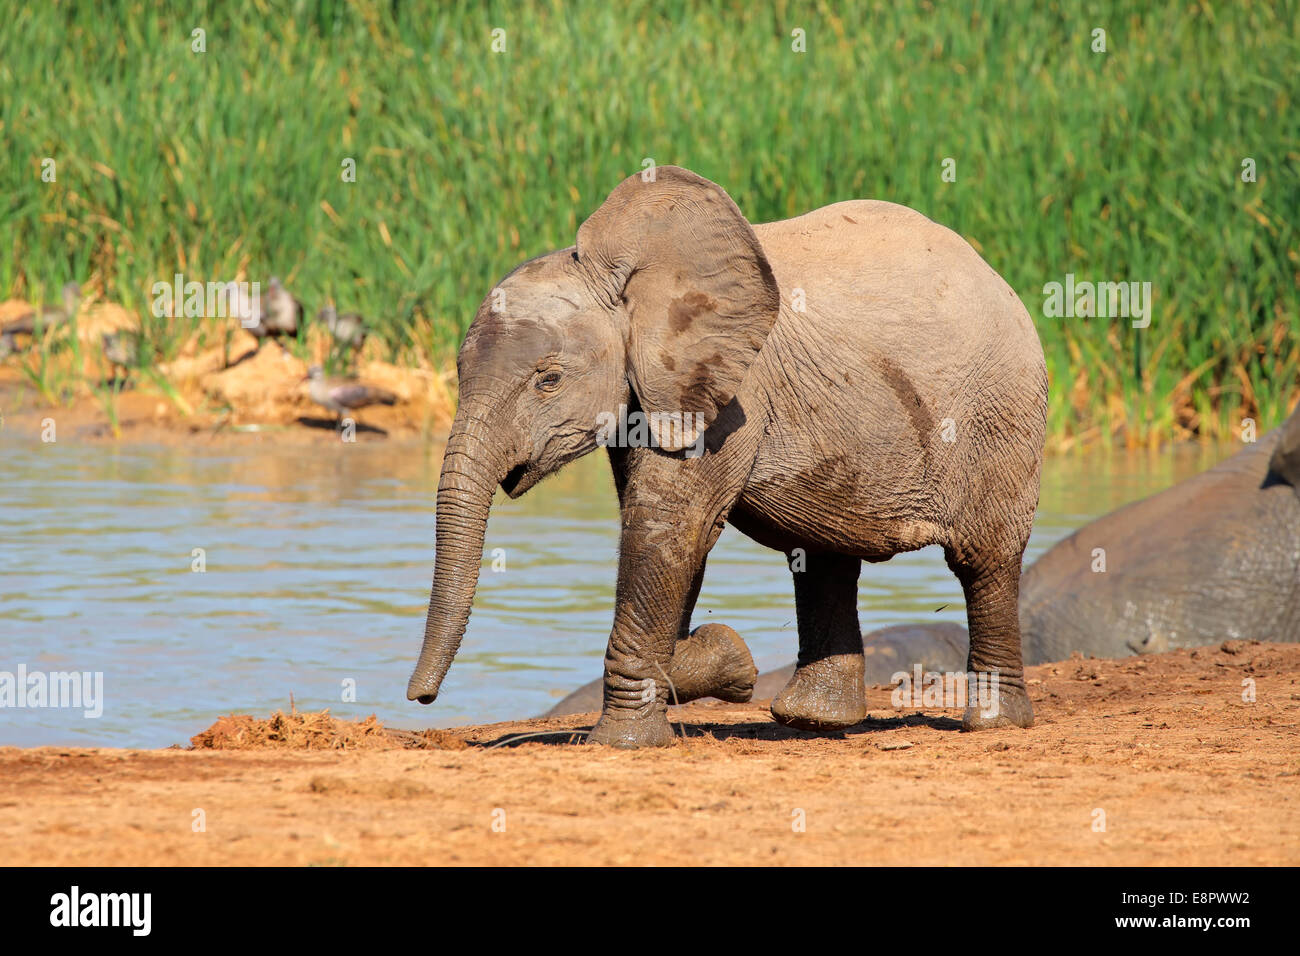 A baby African elephant (Loxodonta africana) at a waterhole, Addo Elephant National Park, South Africa Stock Photo